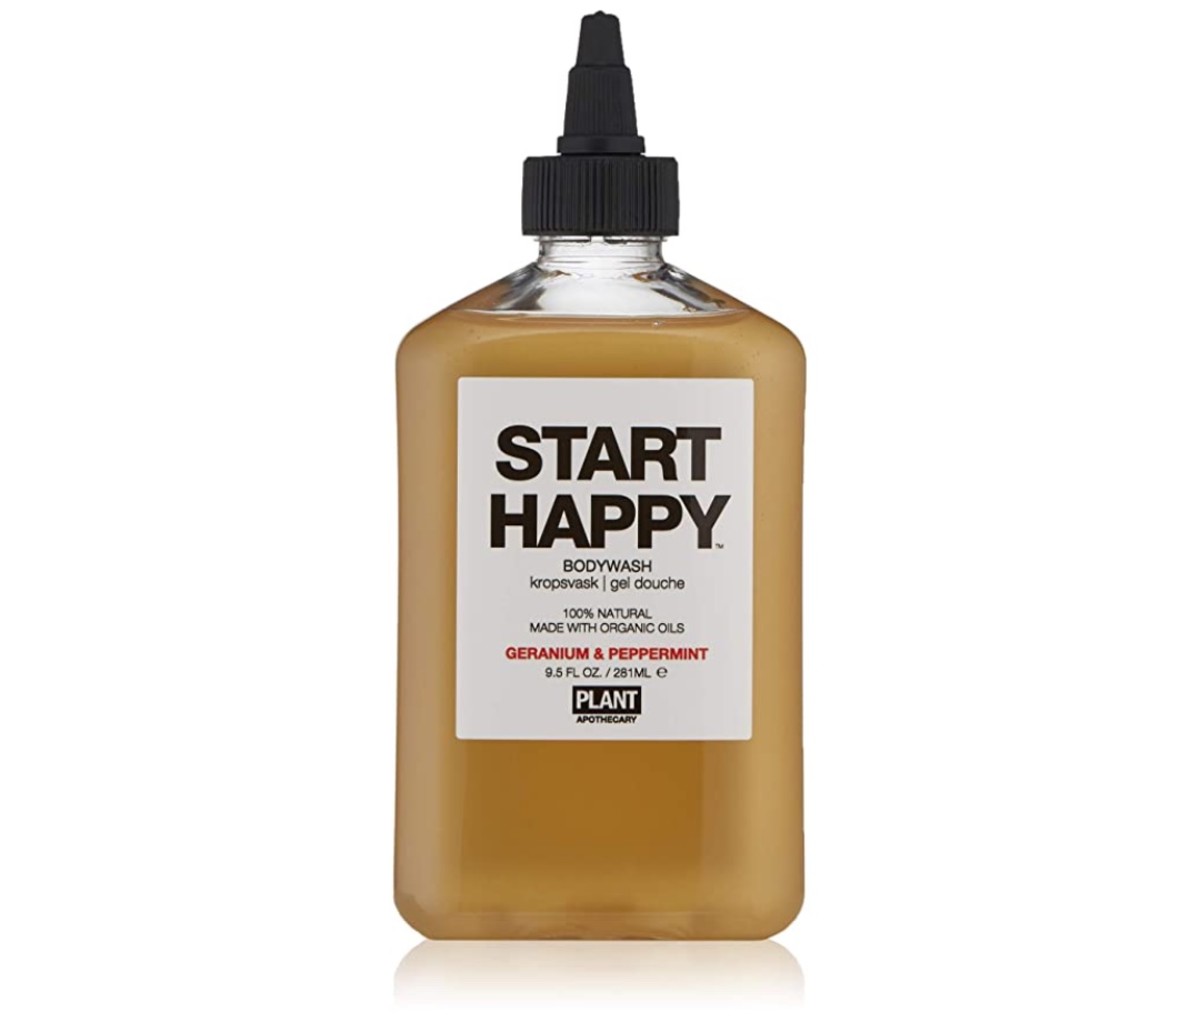 Start Happy Body Wash from Plant Apothecary